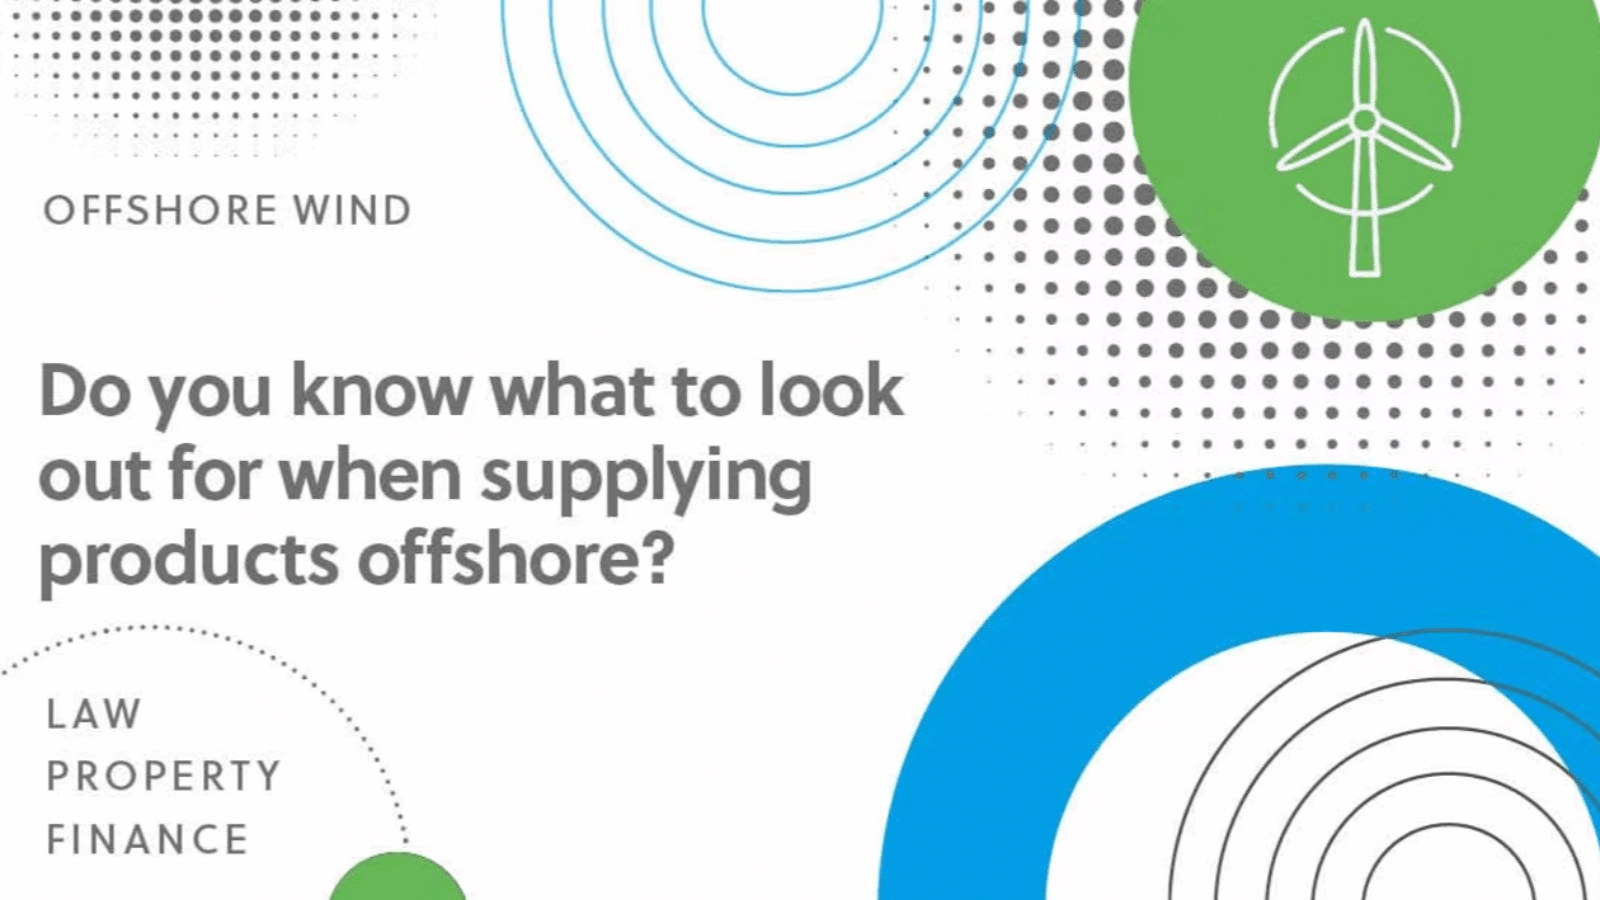 Do you know what to look out for when supplying products offshore?